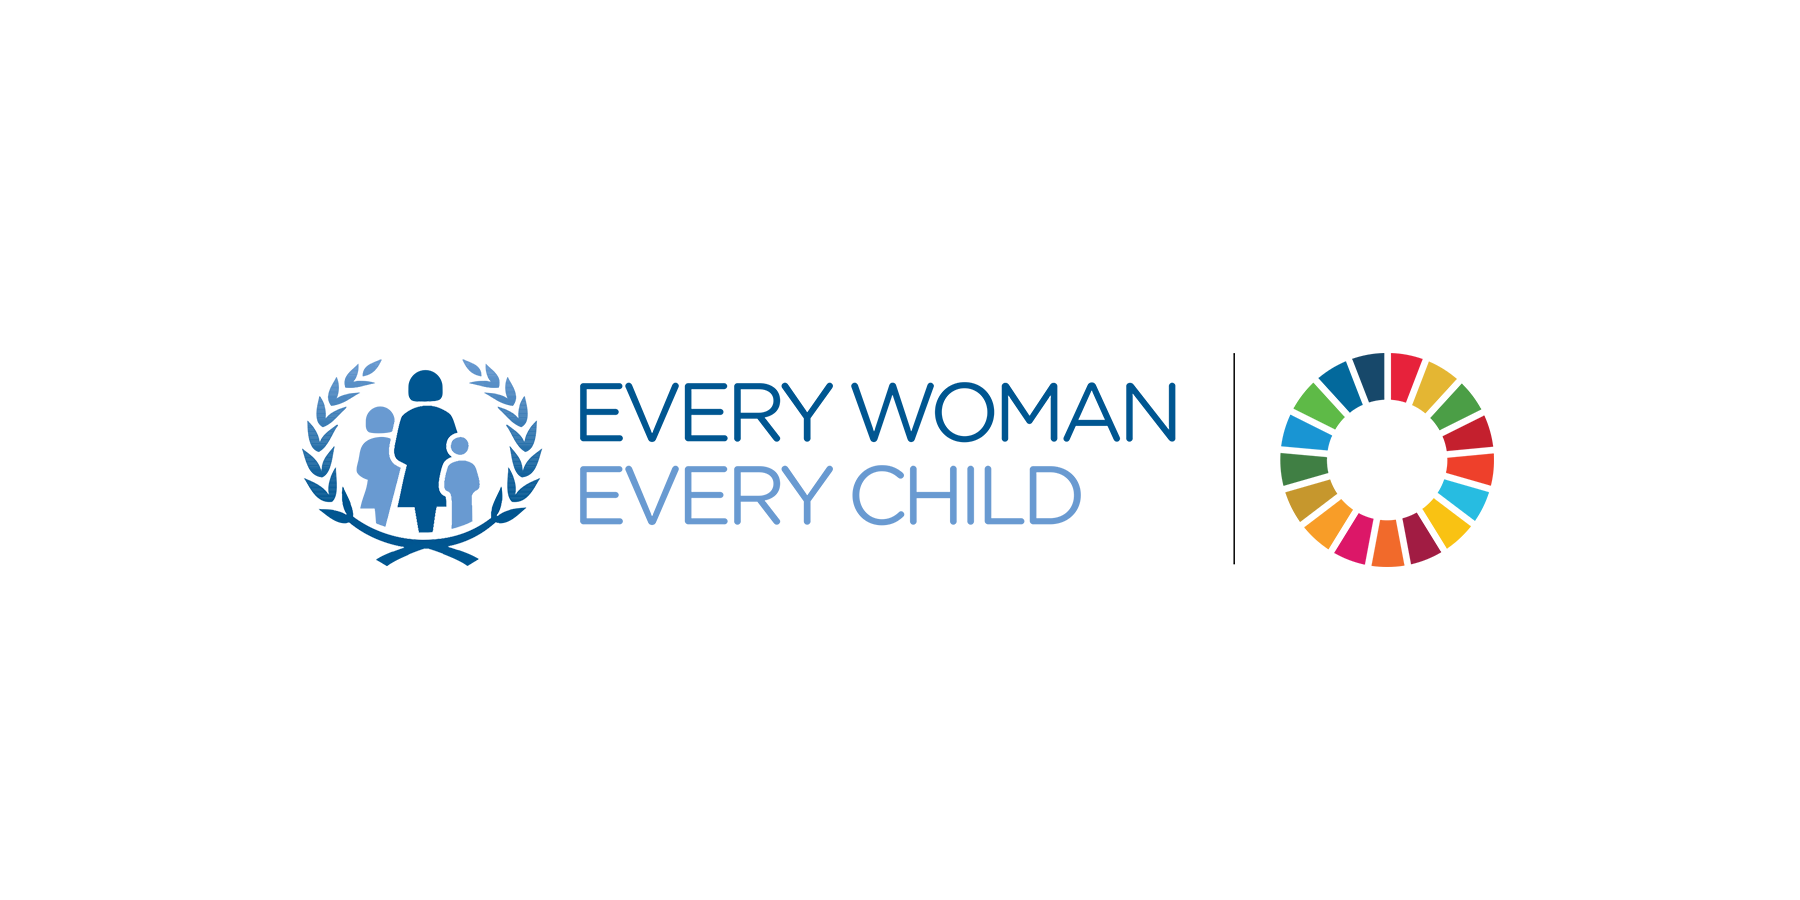 SDG Media Zone Partners with Every Women Every Child at ECOSOC Youth Forum to Support Youth Marketplace on Social Innovations for Health and Wellbeing